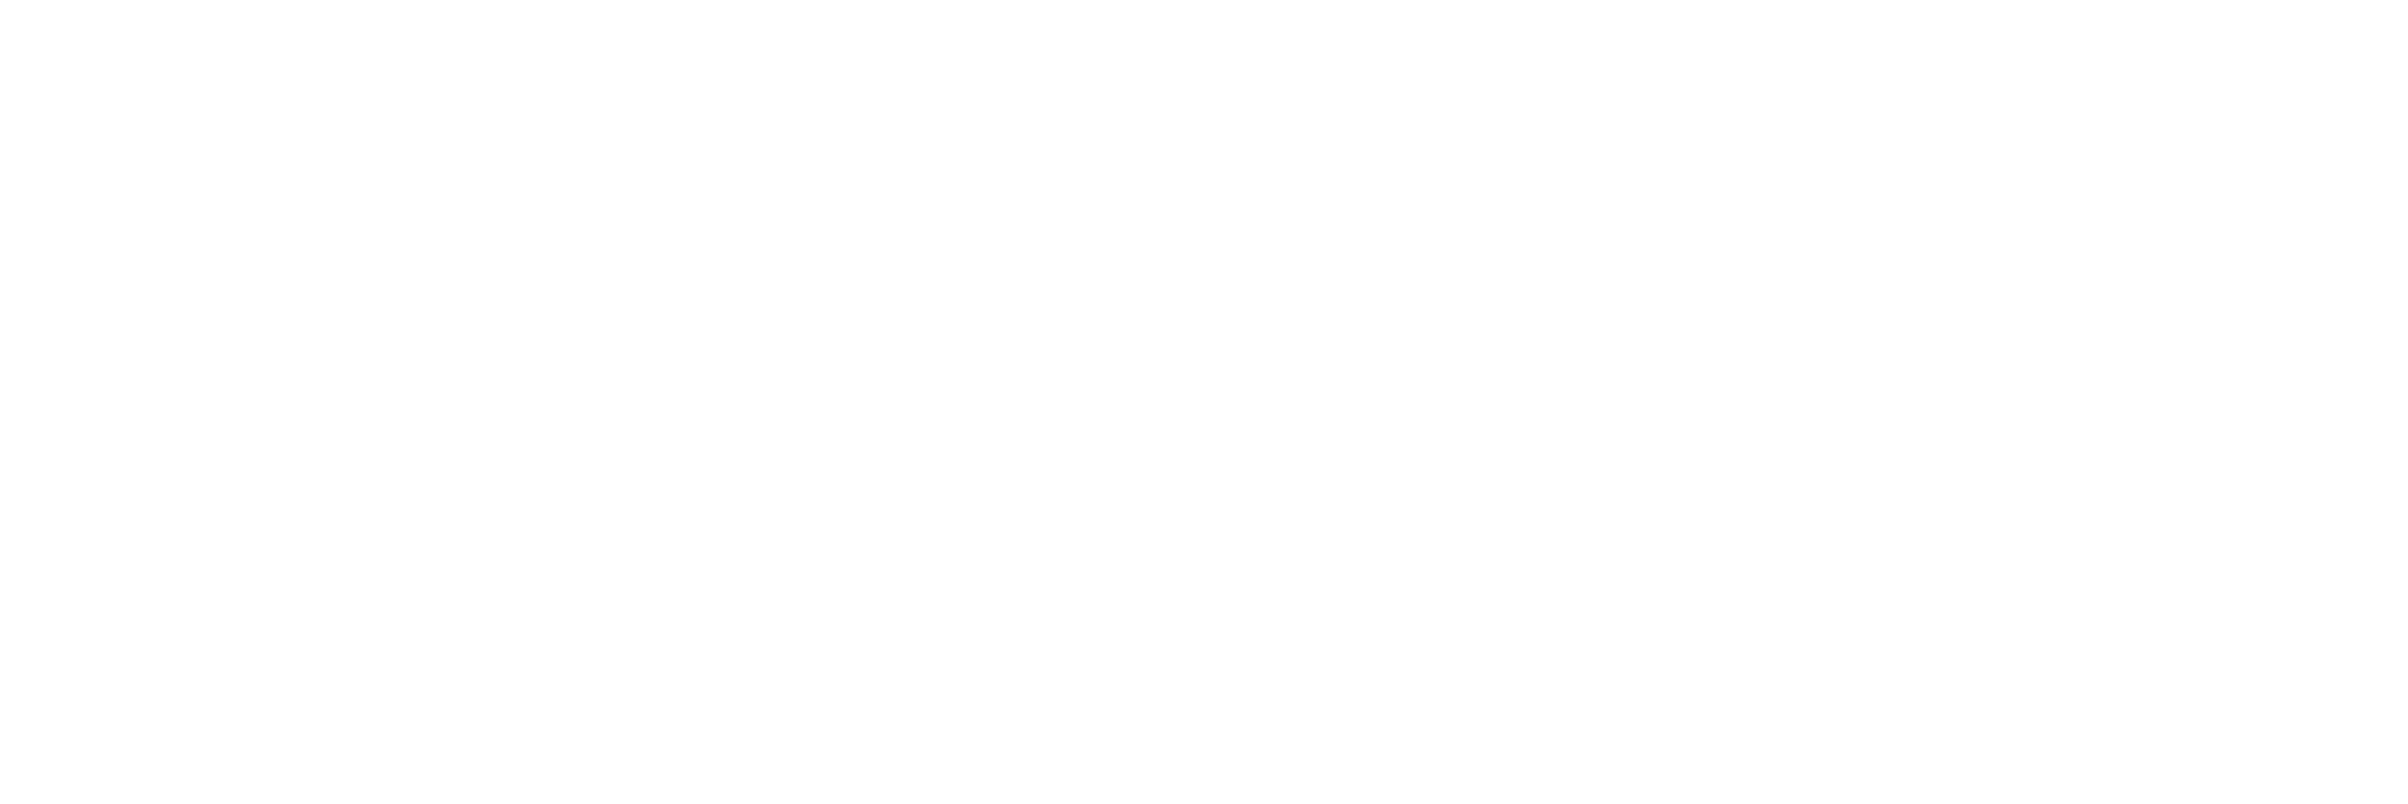 Lincoln Days 2017